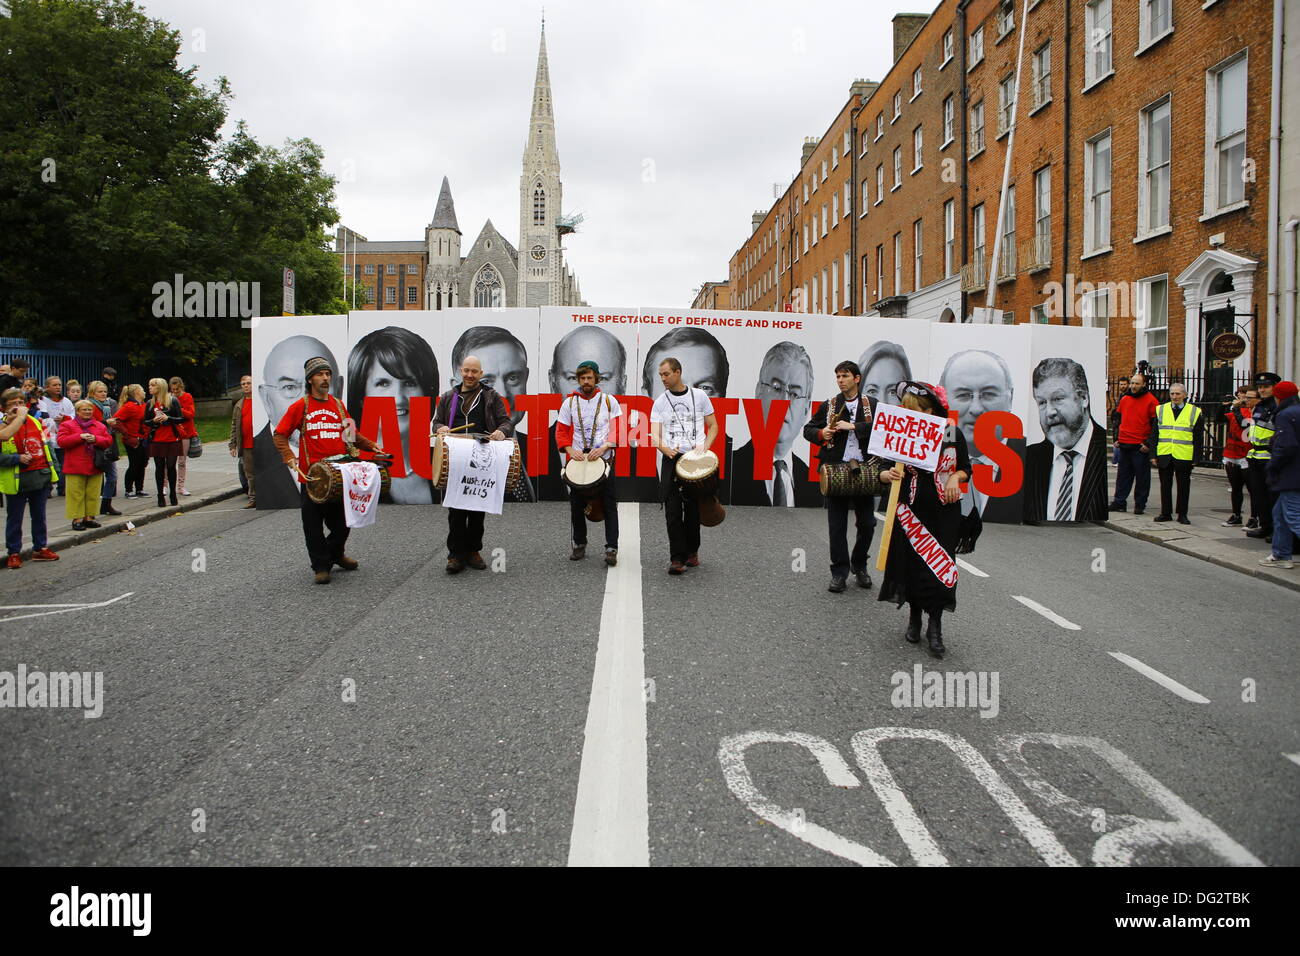 Dublin, Ireland. 12th October 2013. Members of the Spectacle of Defiance & Hope hold large signs with pictures of government ministers and reads 'Austerity Kills'. Members with drums walk in front of the sign. Unions called for a protest march through Dublin, ahead of the announcing of the 2014 budget next week. They protested against cuts in Social Welfare, Health and Education and for an utilisation of alternative revenue sources by the government. © Michael Debets/Alamy Live News Stock Photo